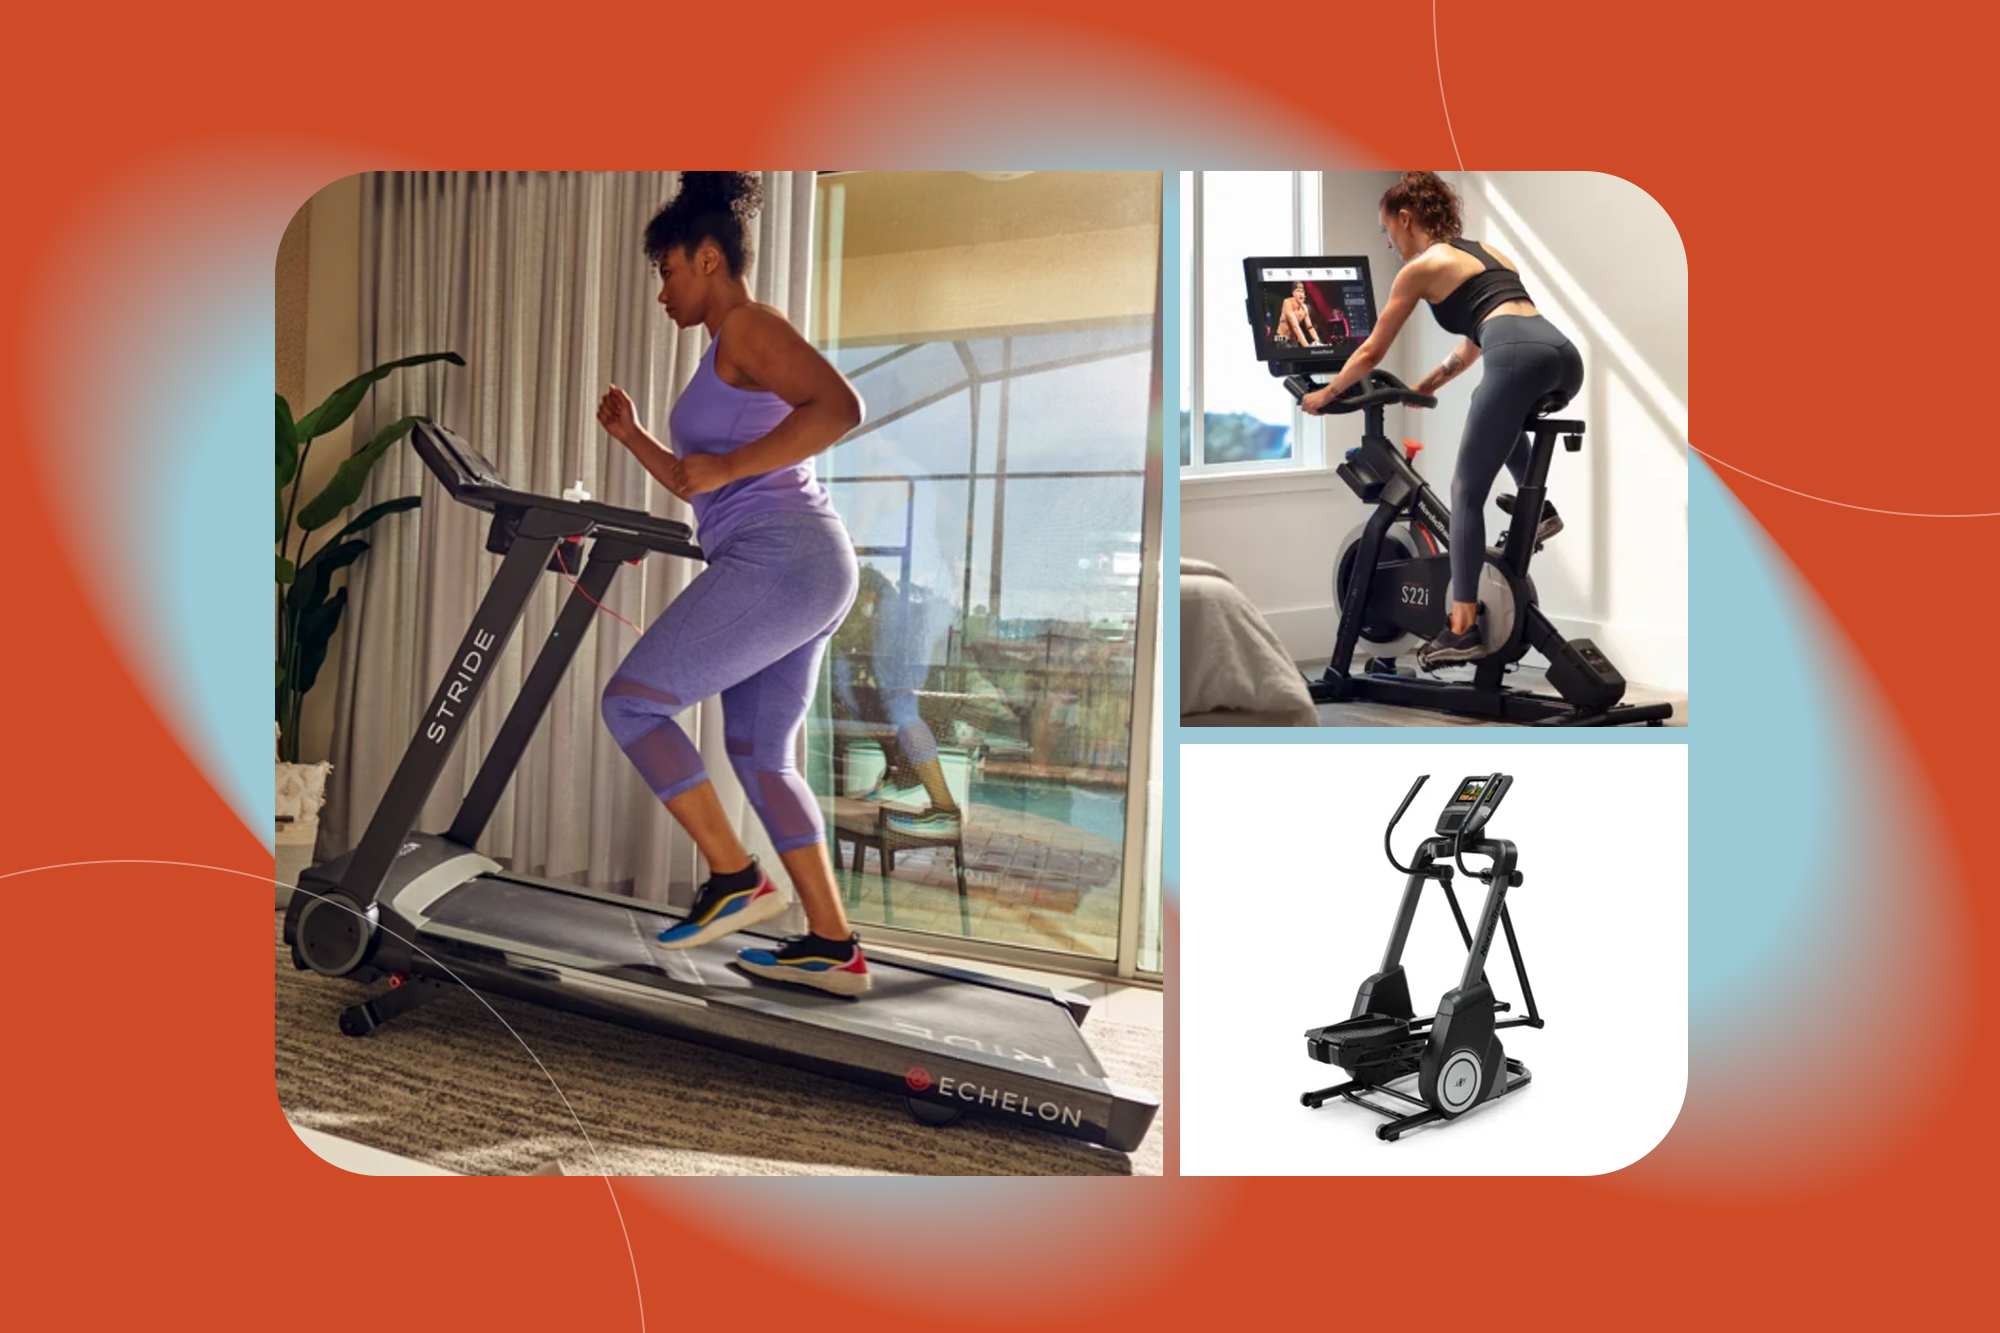 Top fitness equipment for women's weight loss? 